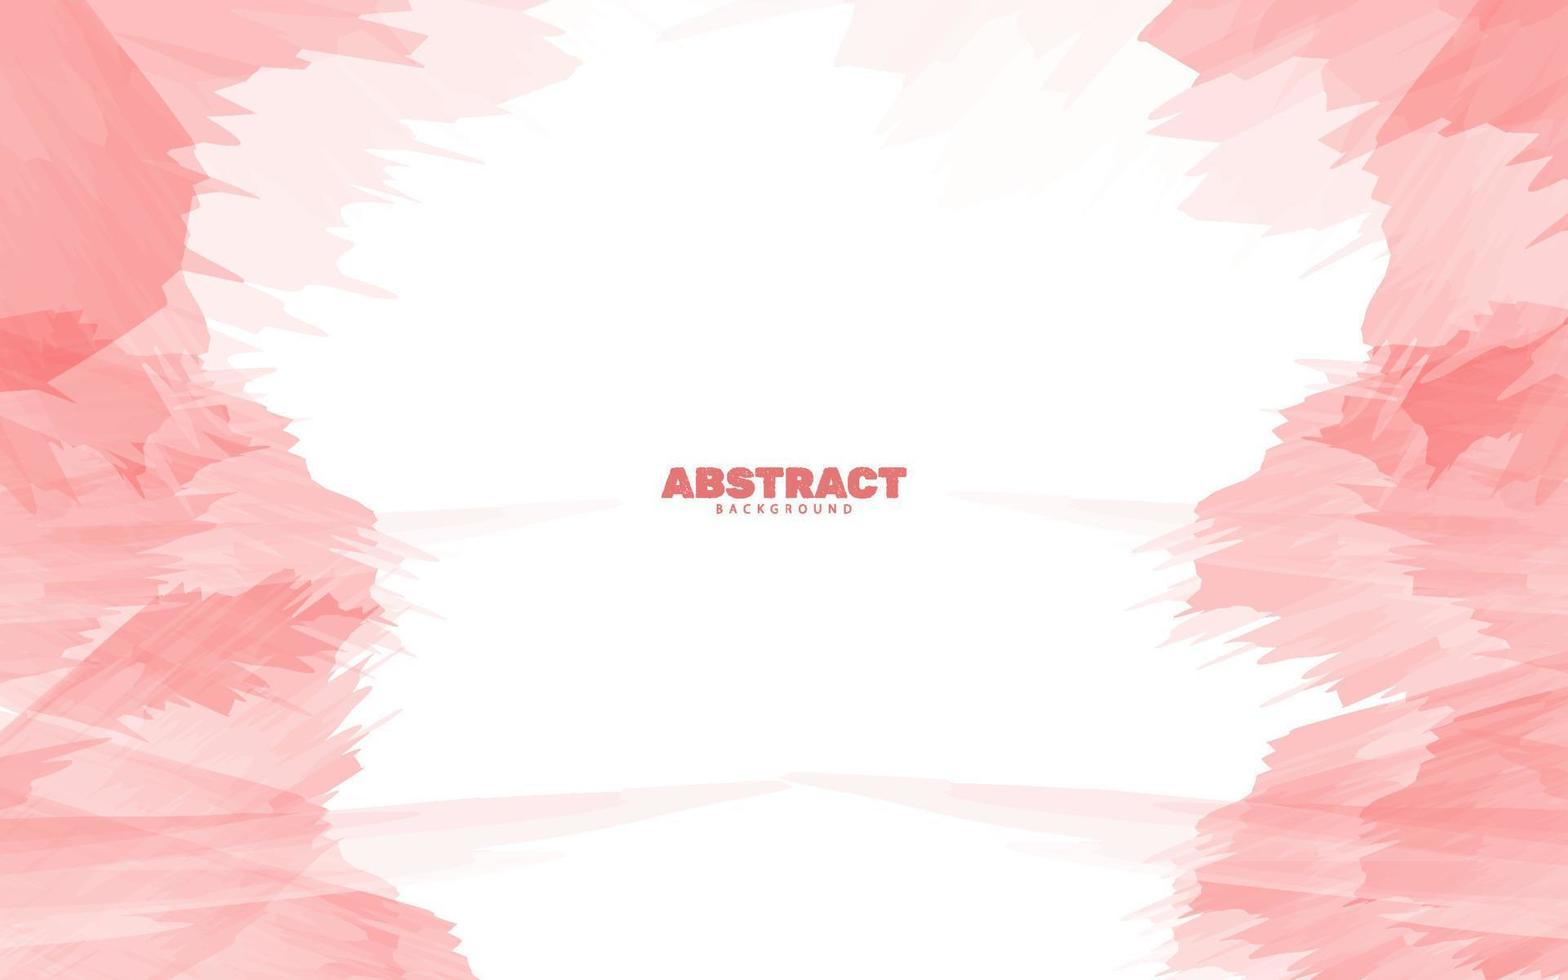 Abstract watercolor red and white background vector